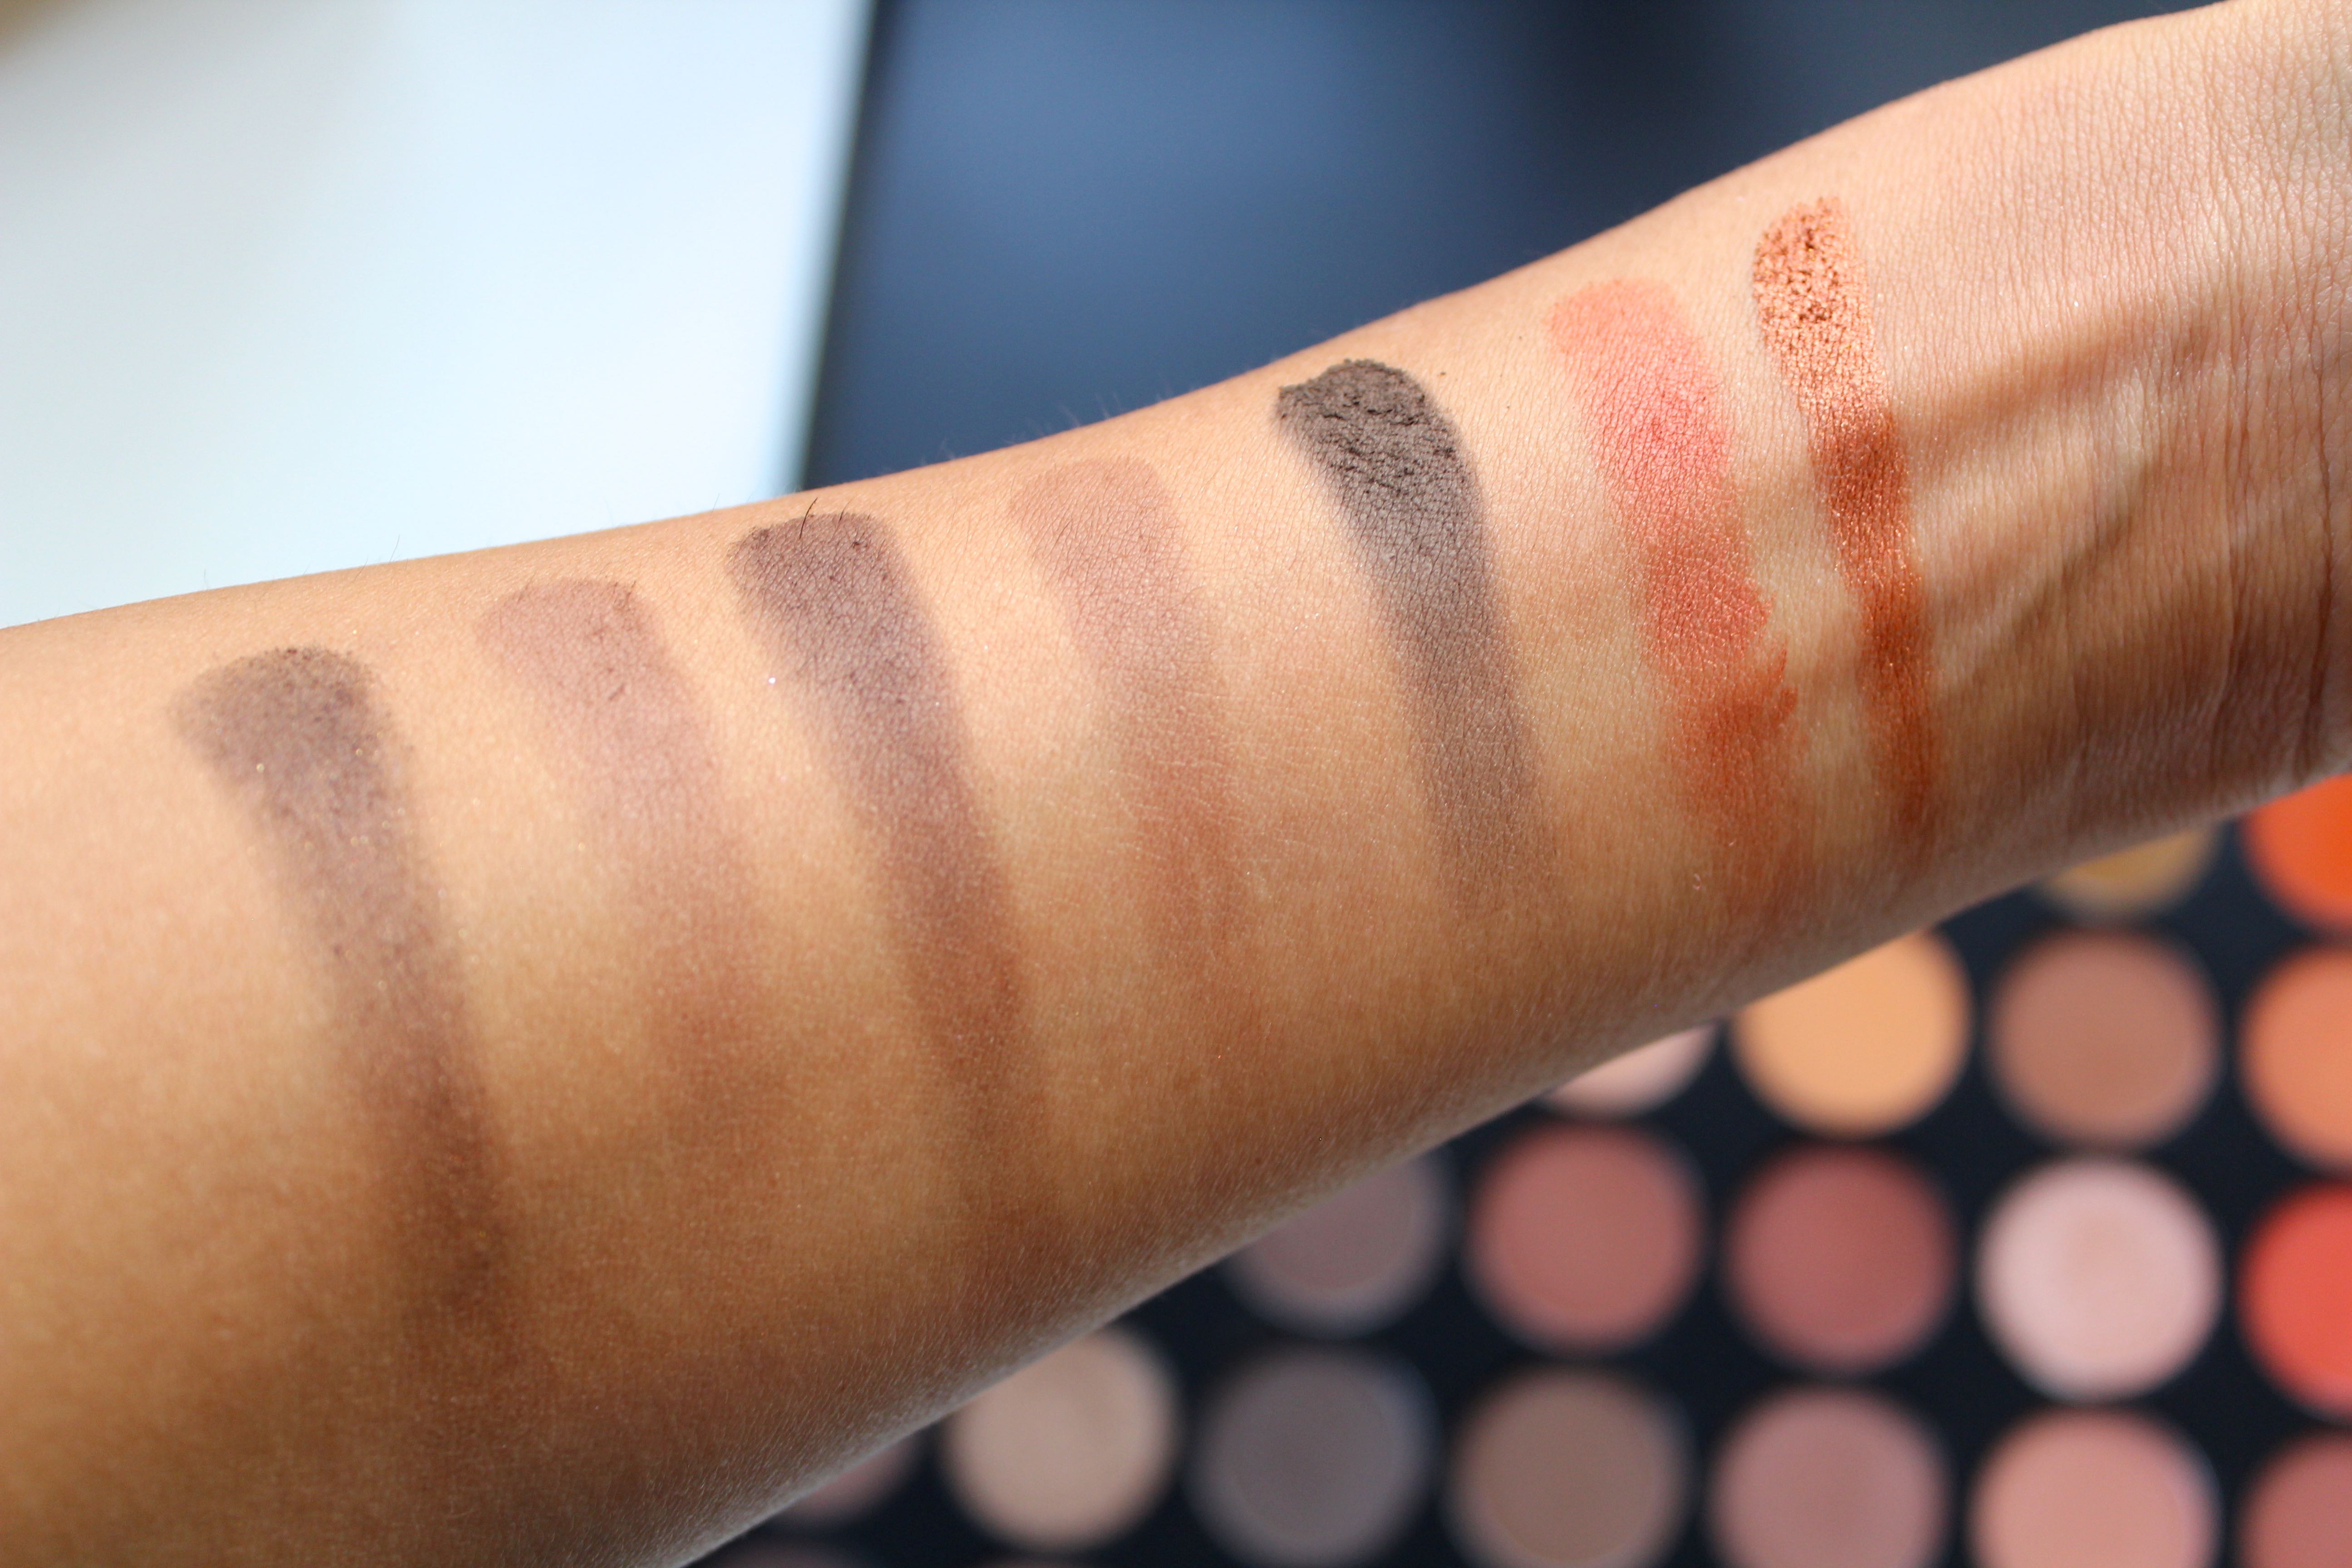 Morphe Brushes 35O Nature Glow Eyeshadow Palette - Review & Swatches by Face Made Up